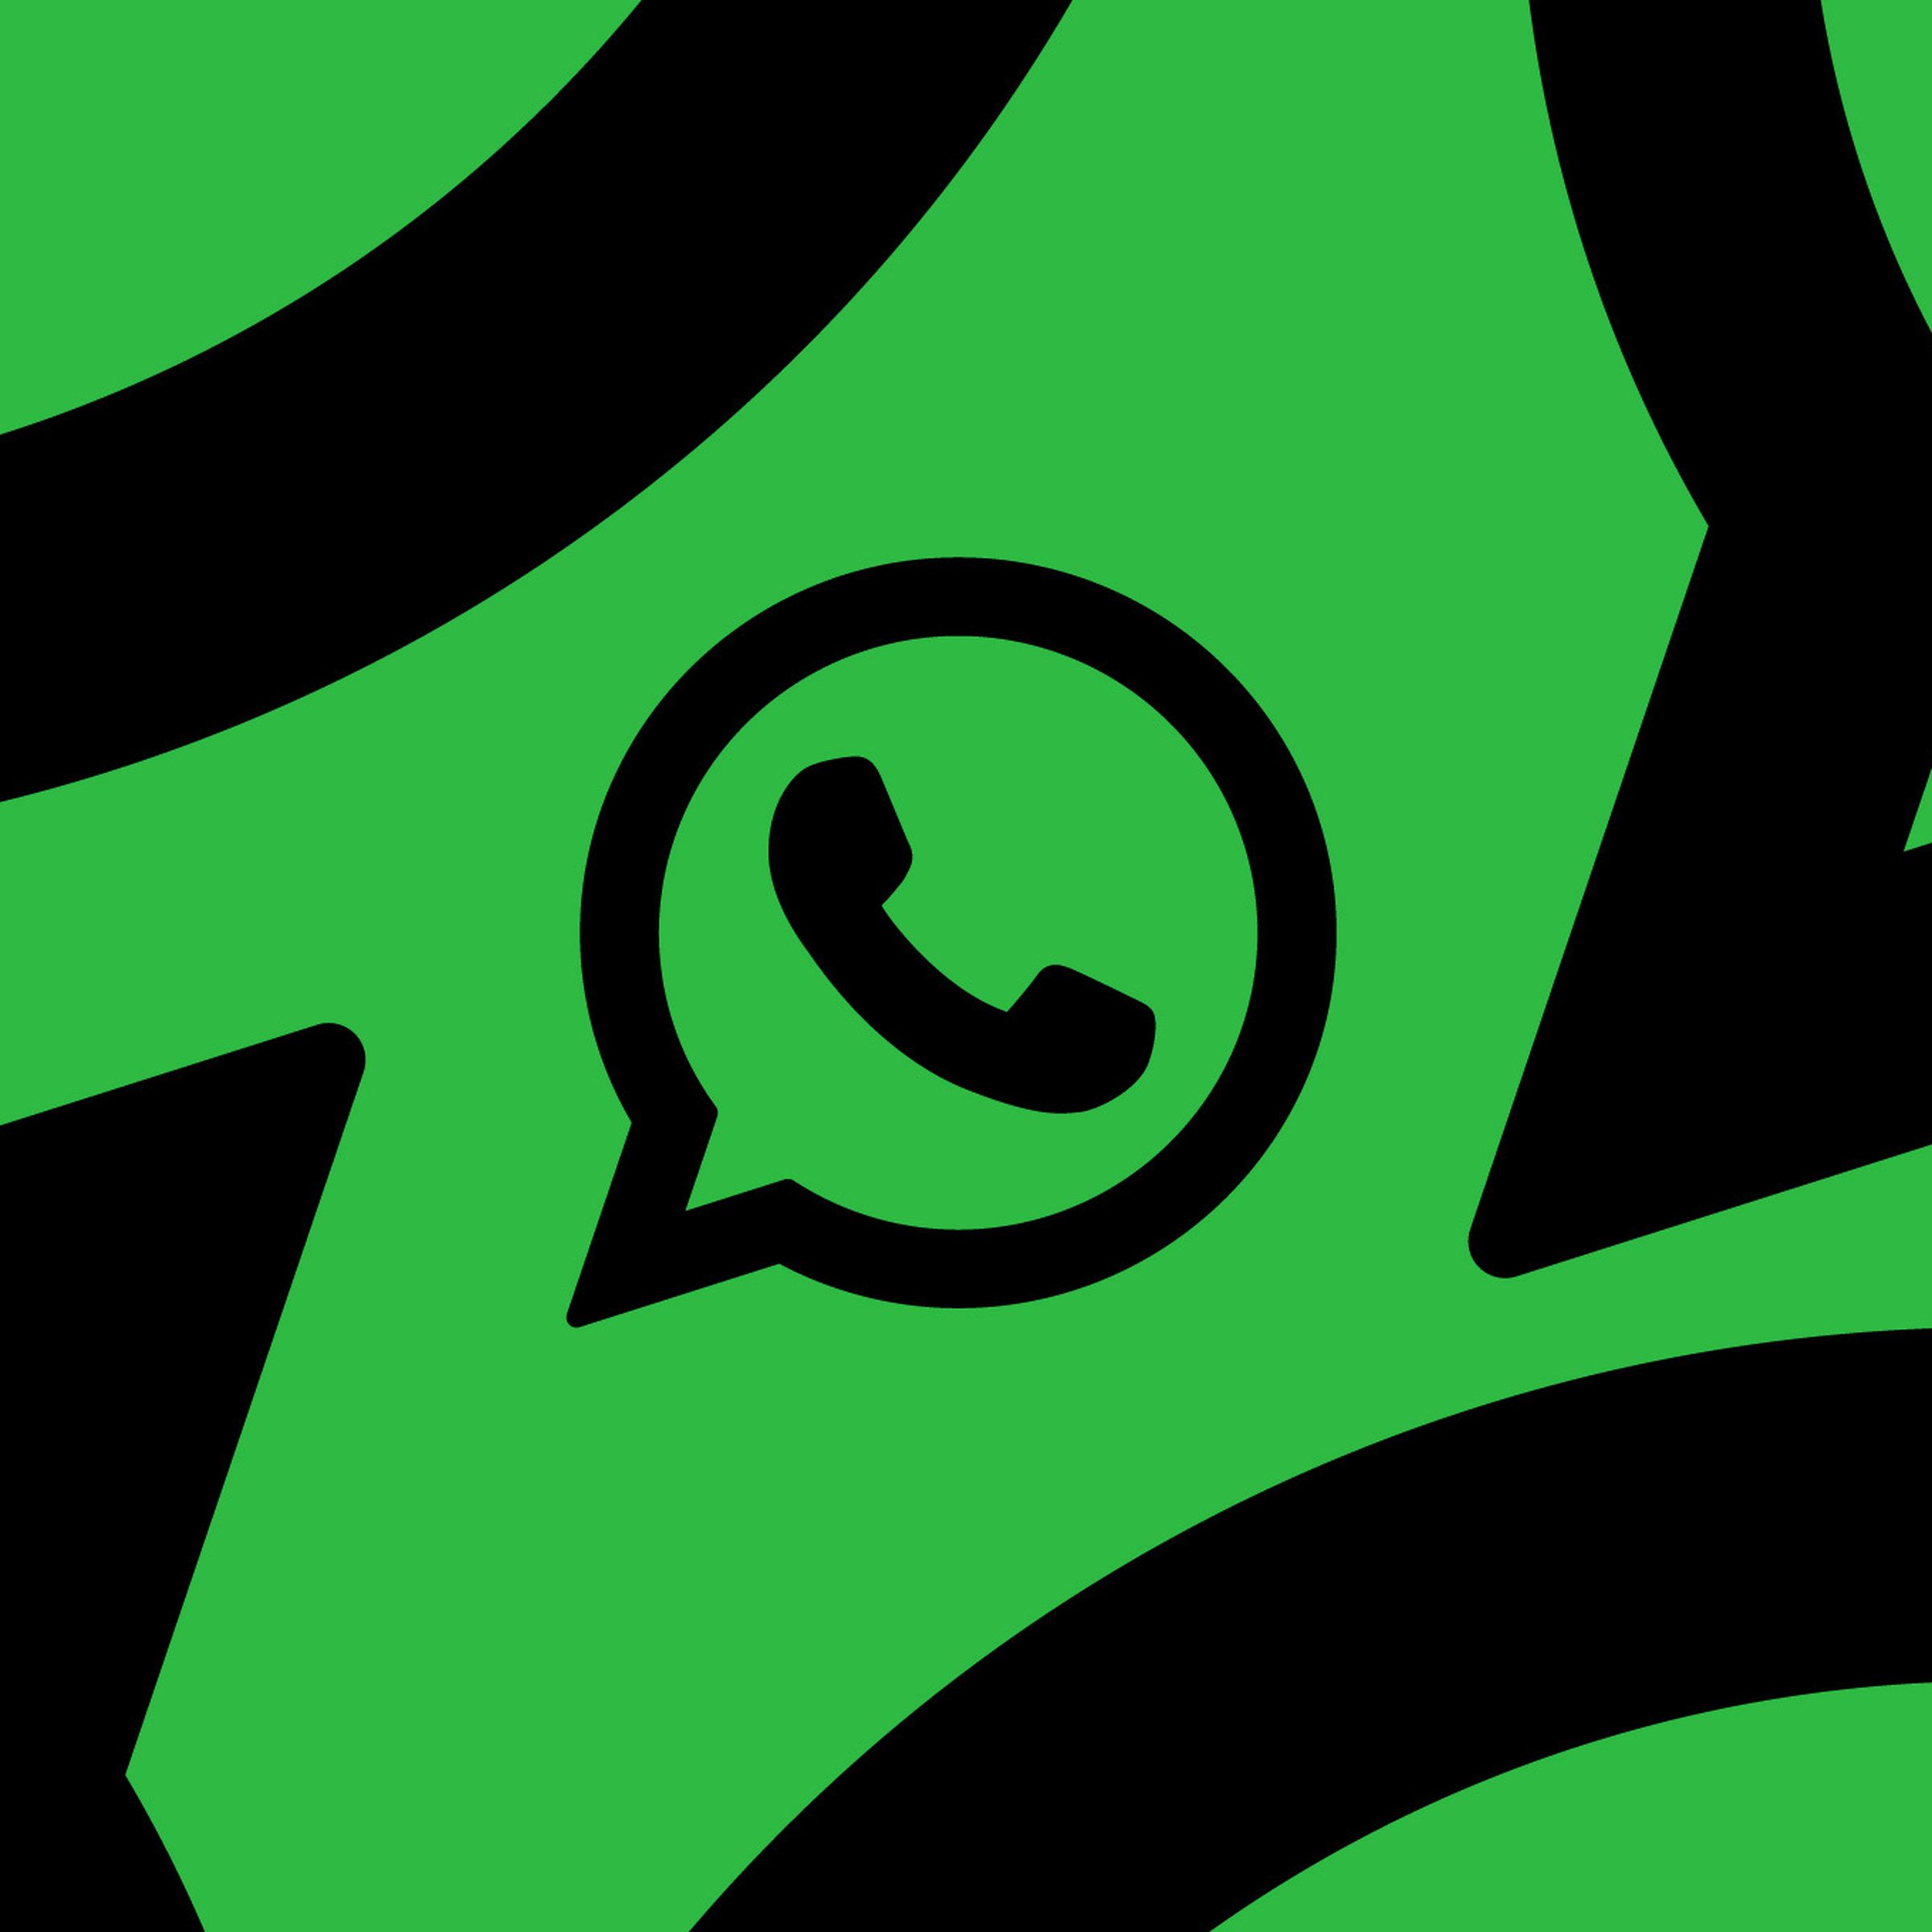 An image showing the WhatsApp logo in black